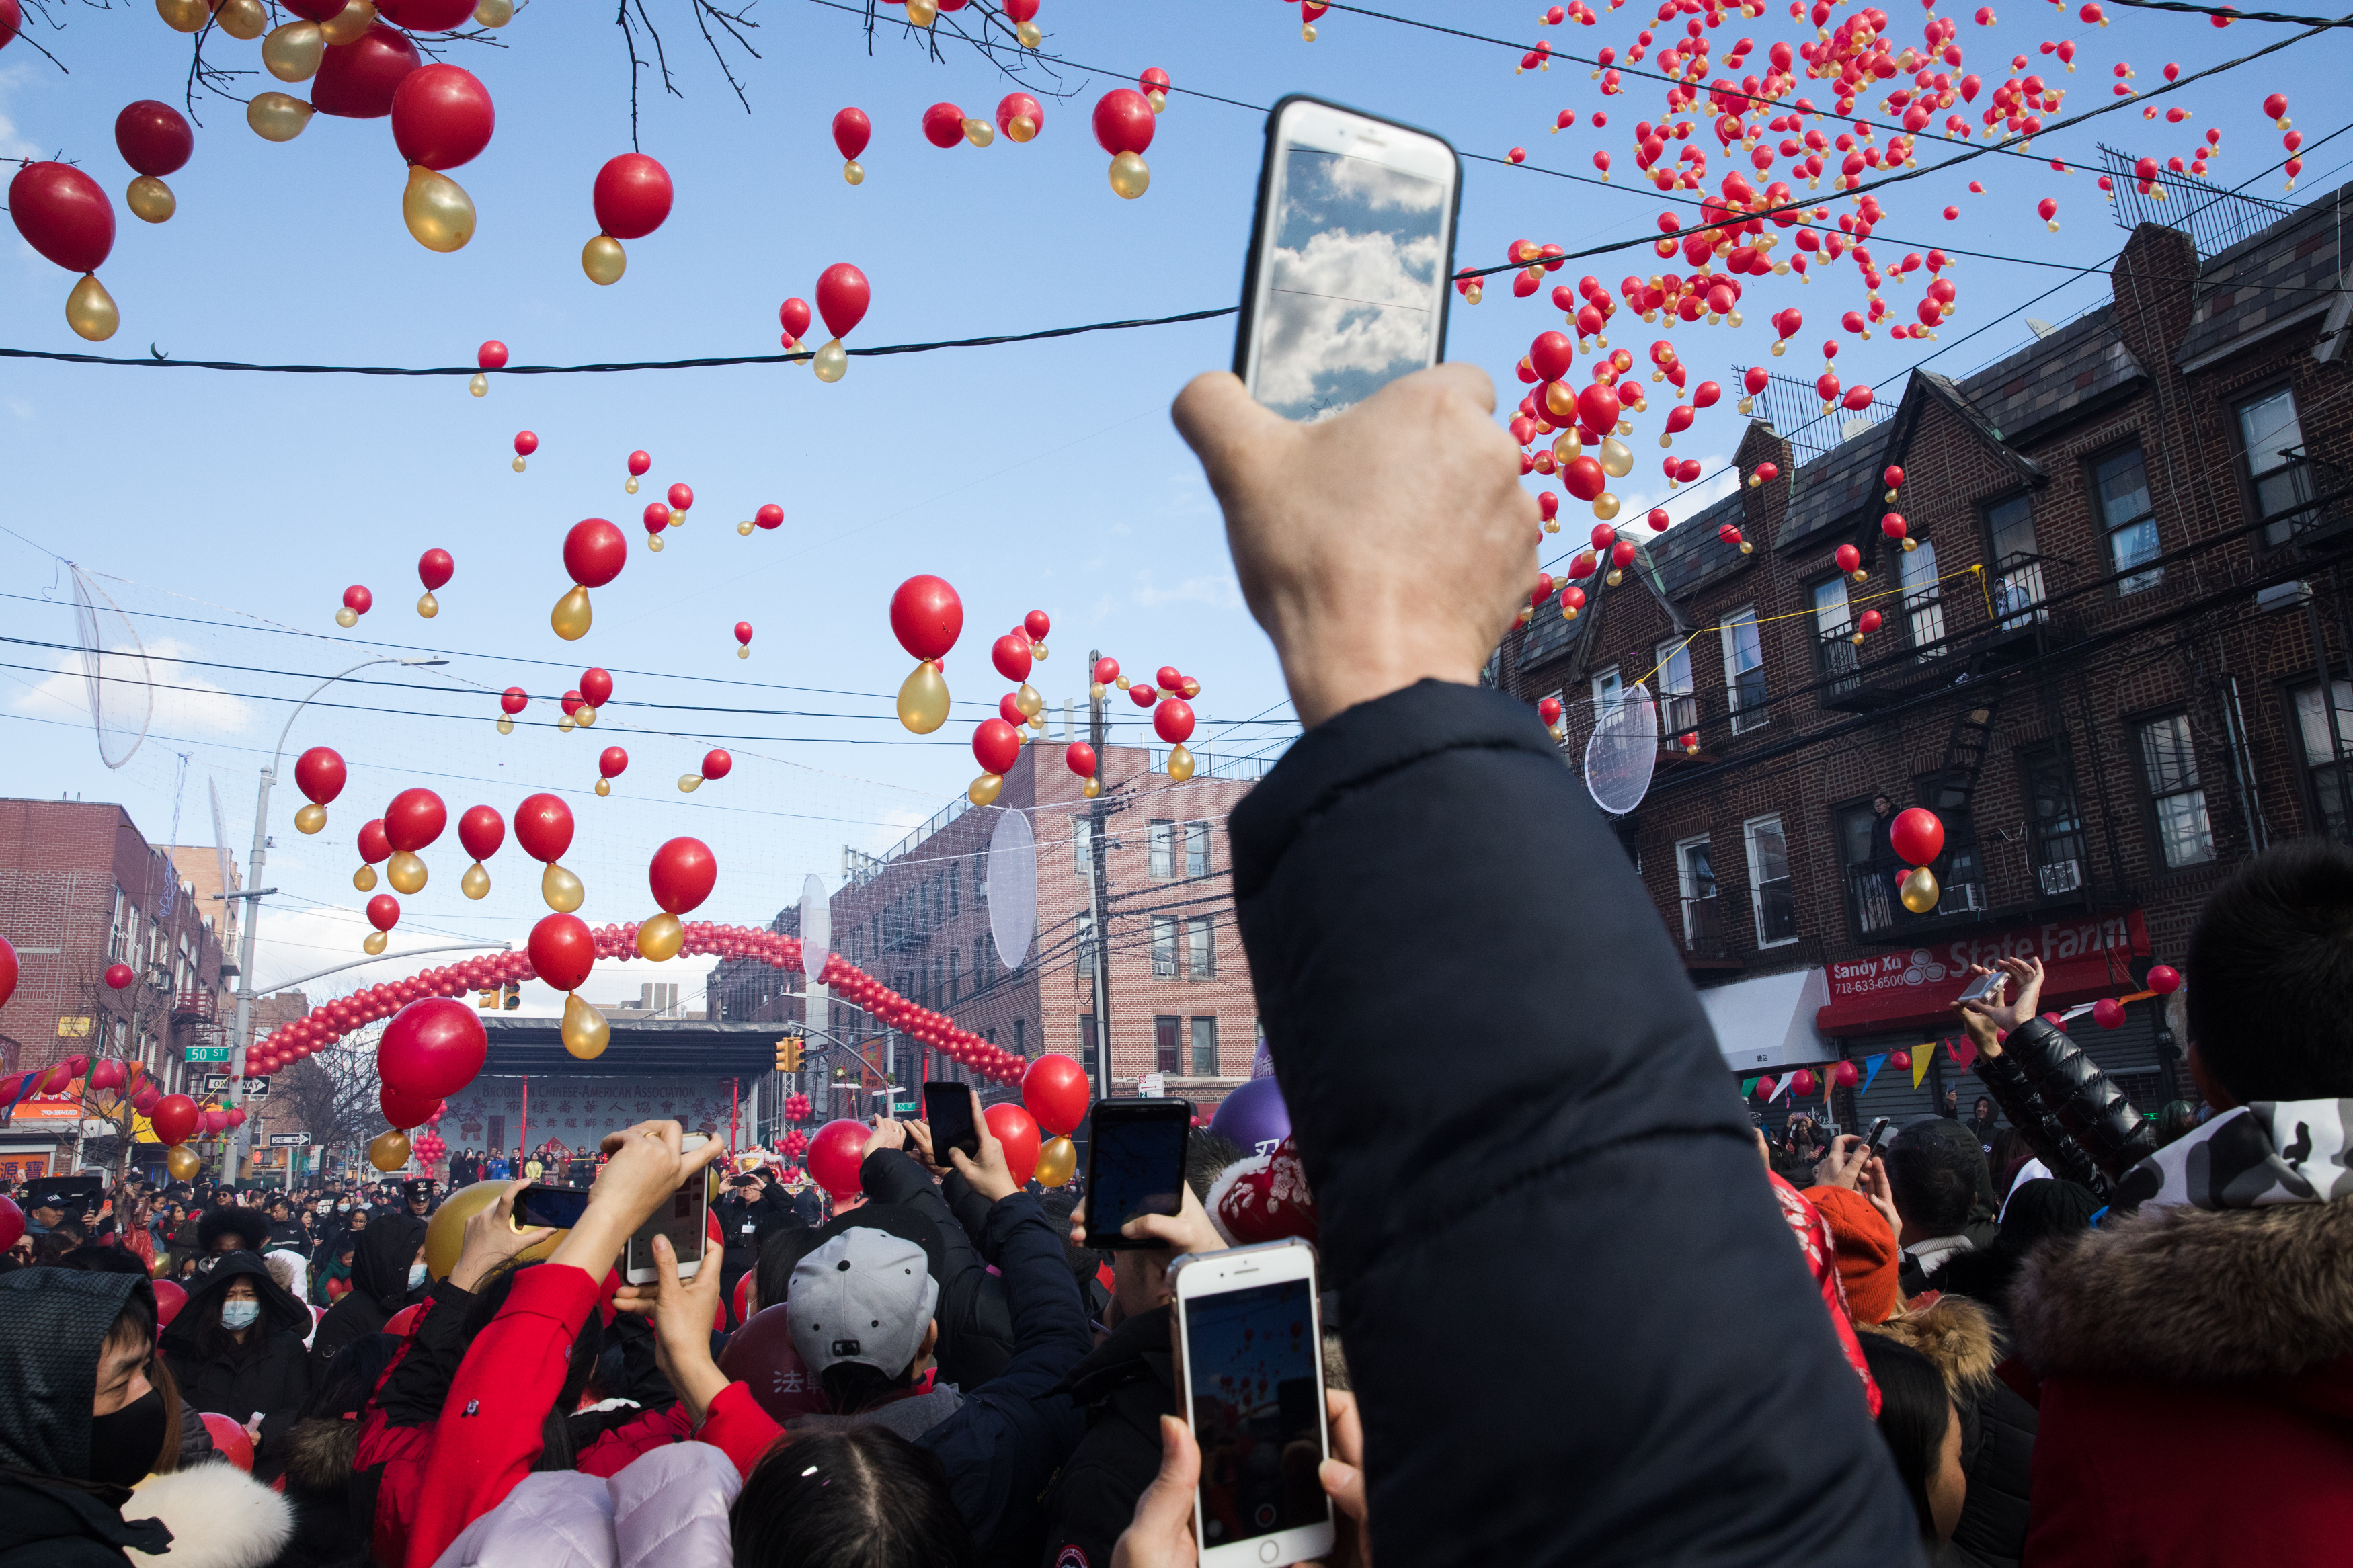 Hundreds of balloons were dropped onto the crowd on 8th Avenue before the parade kicked off.